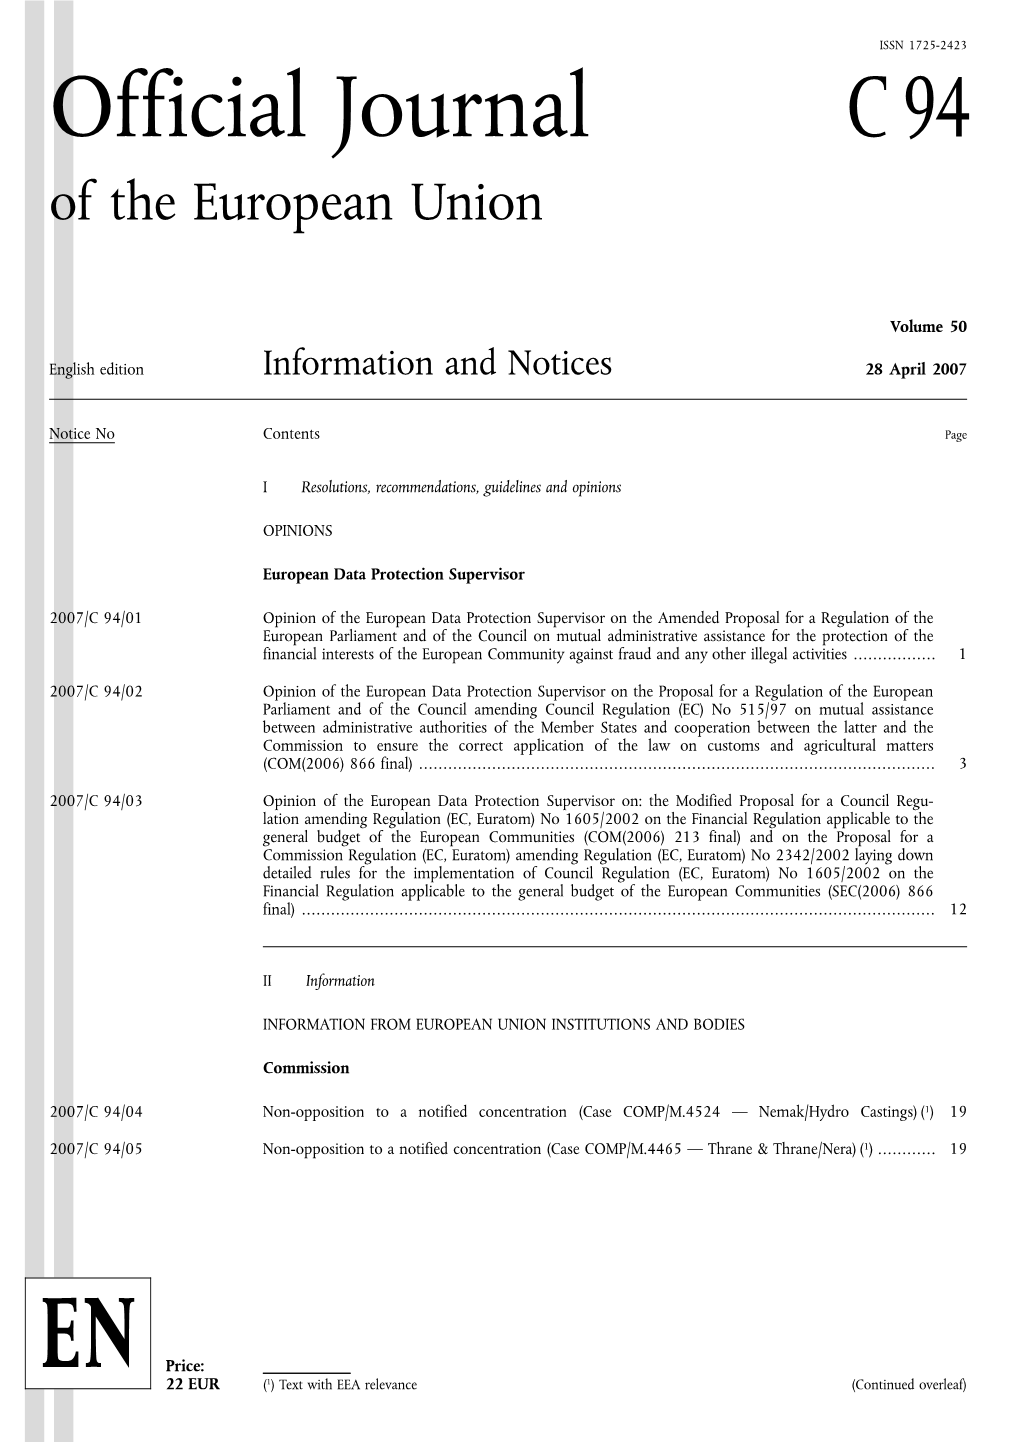 Official Journal C 94 of the European Union